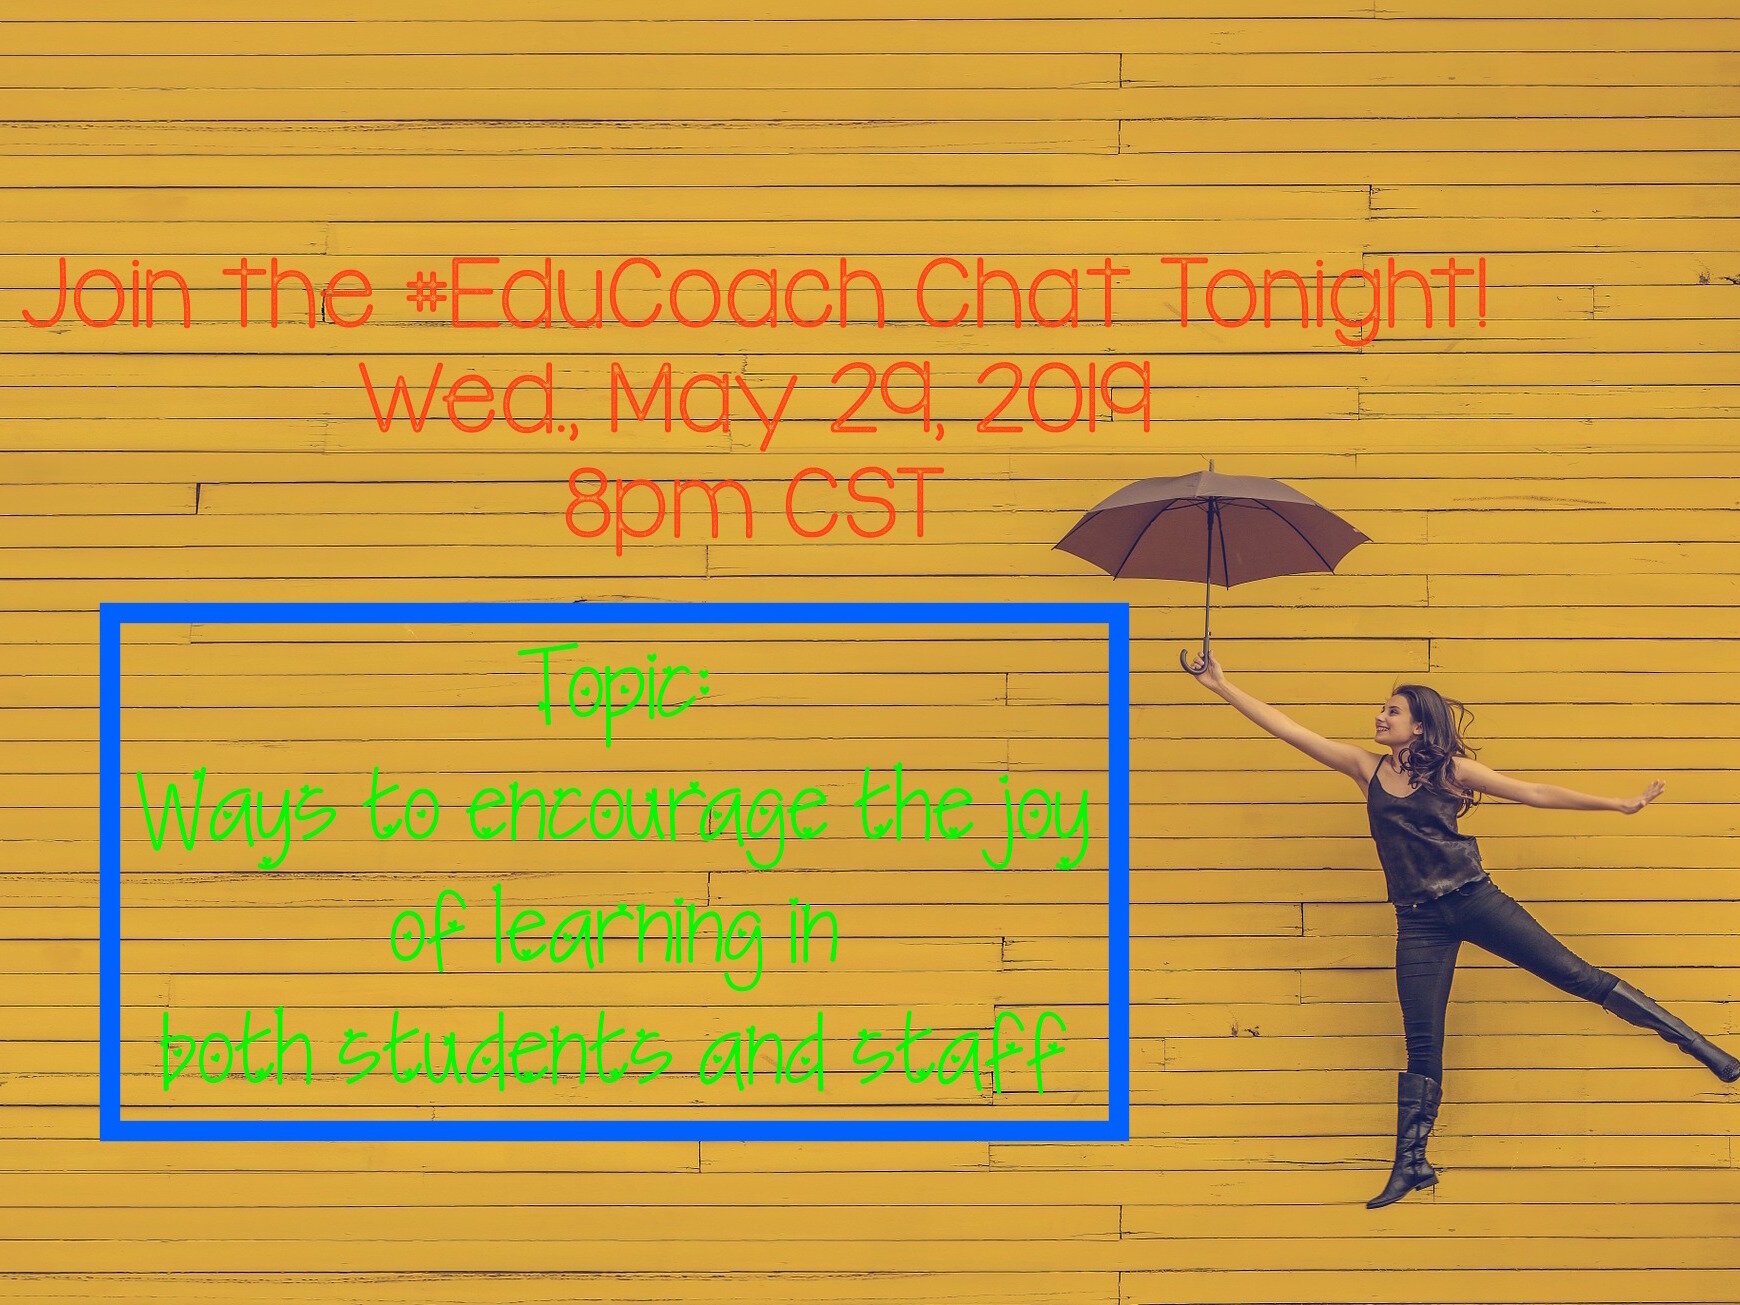 May 29, 2019 #educoach Chat